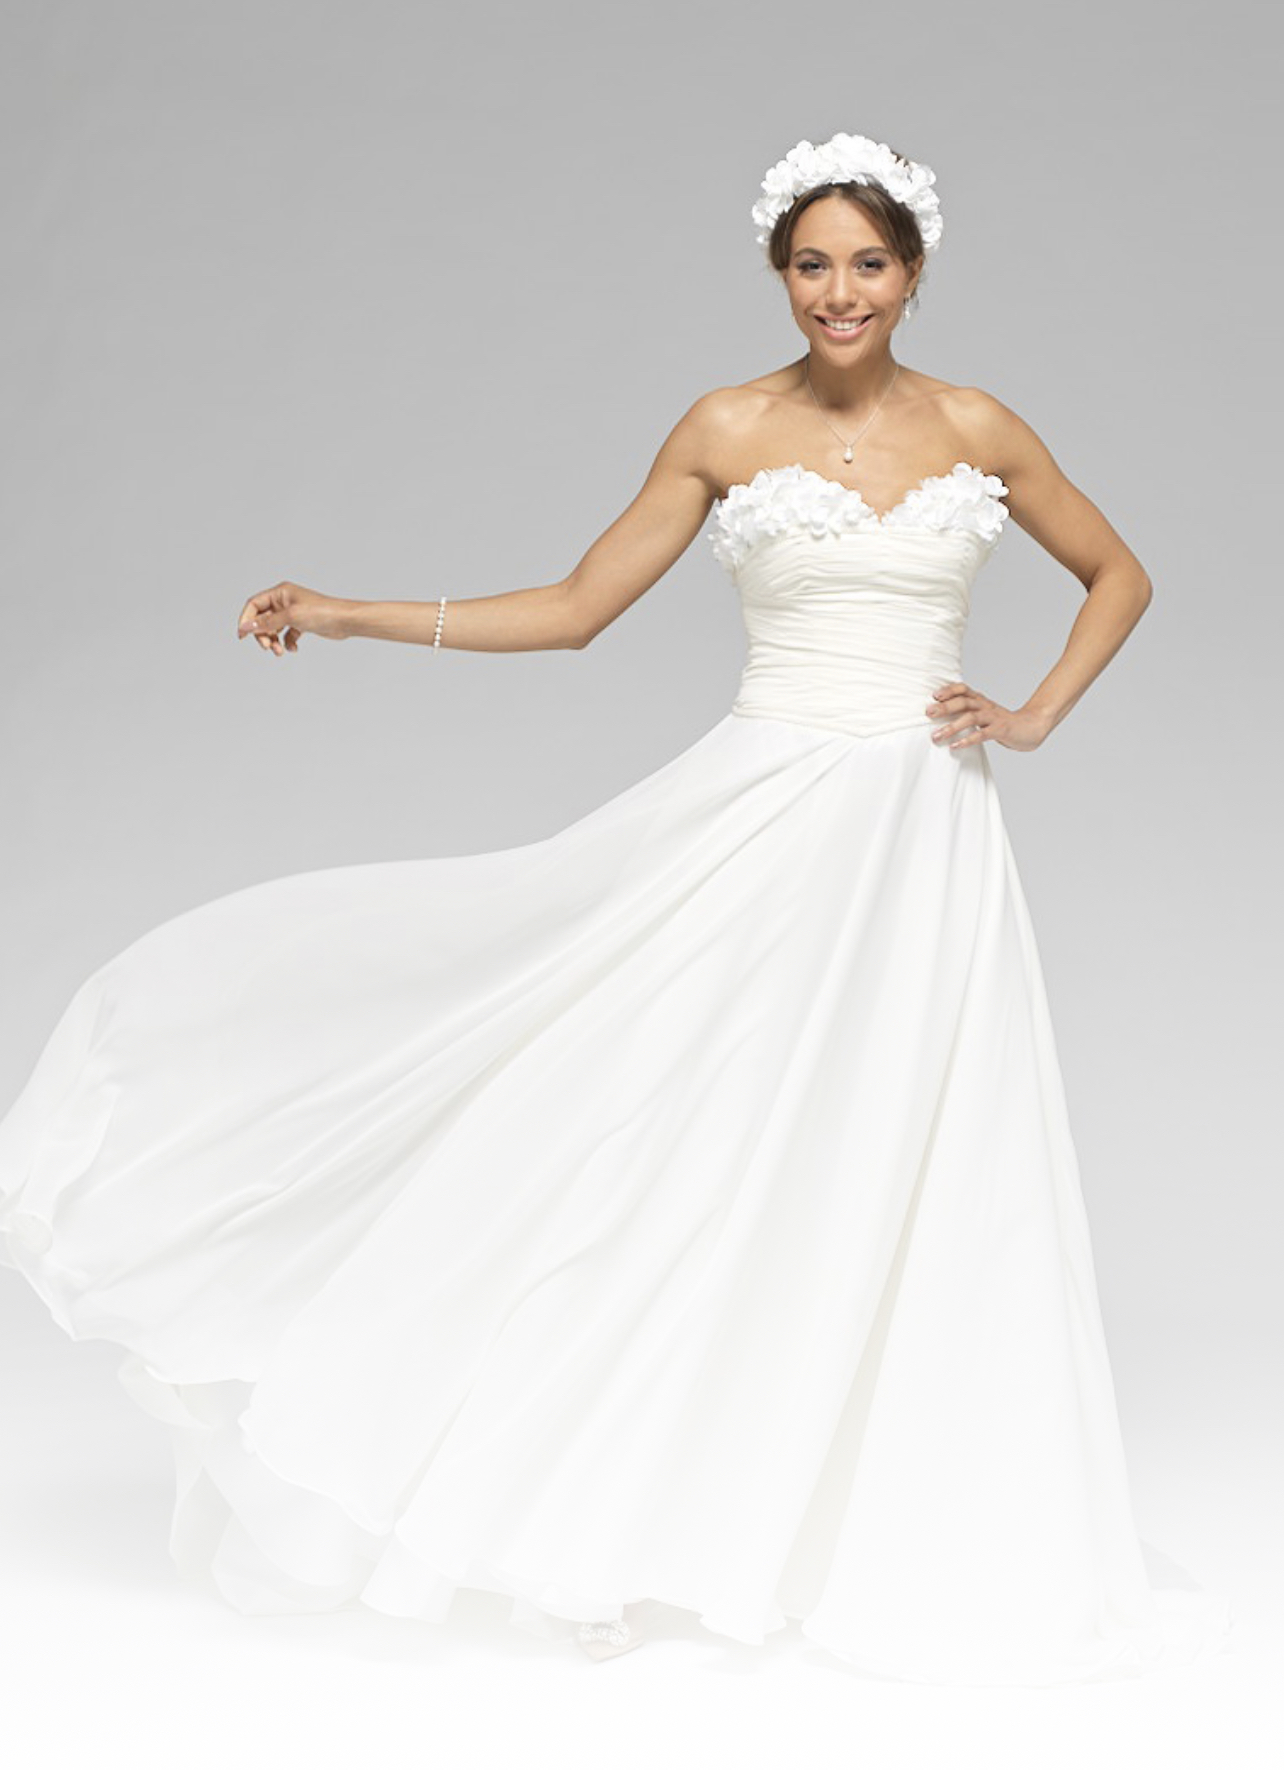 A wedding gown from the Shane Moore Designs Venus Collection